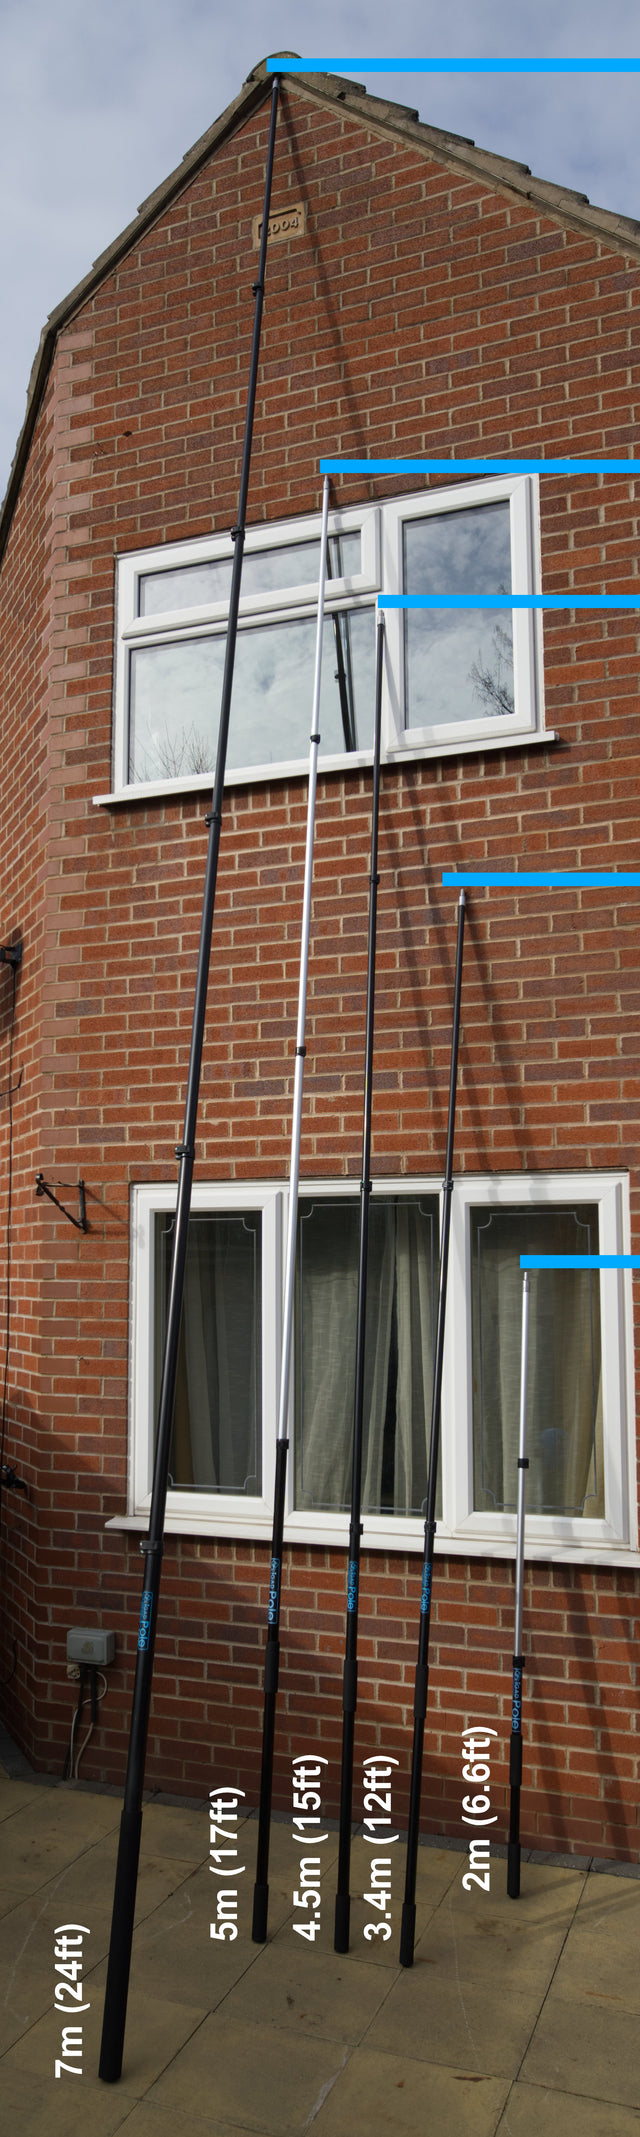 3/4 Extension Poles 4 pack - Zinc- 12 Long- 1.0 mm Thickness